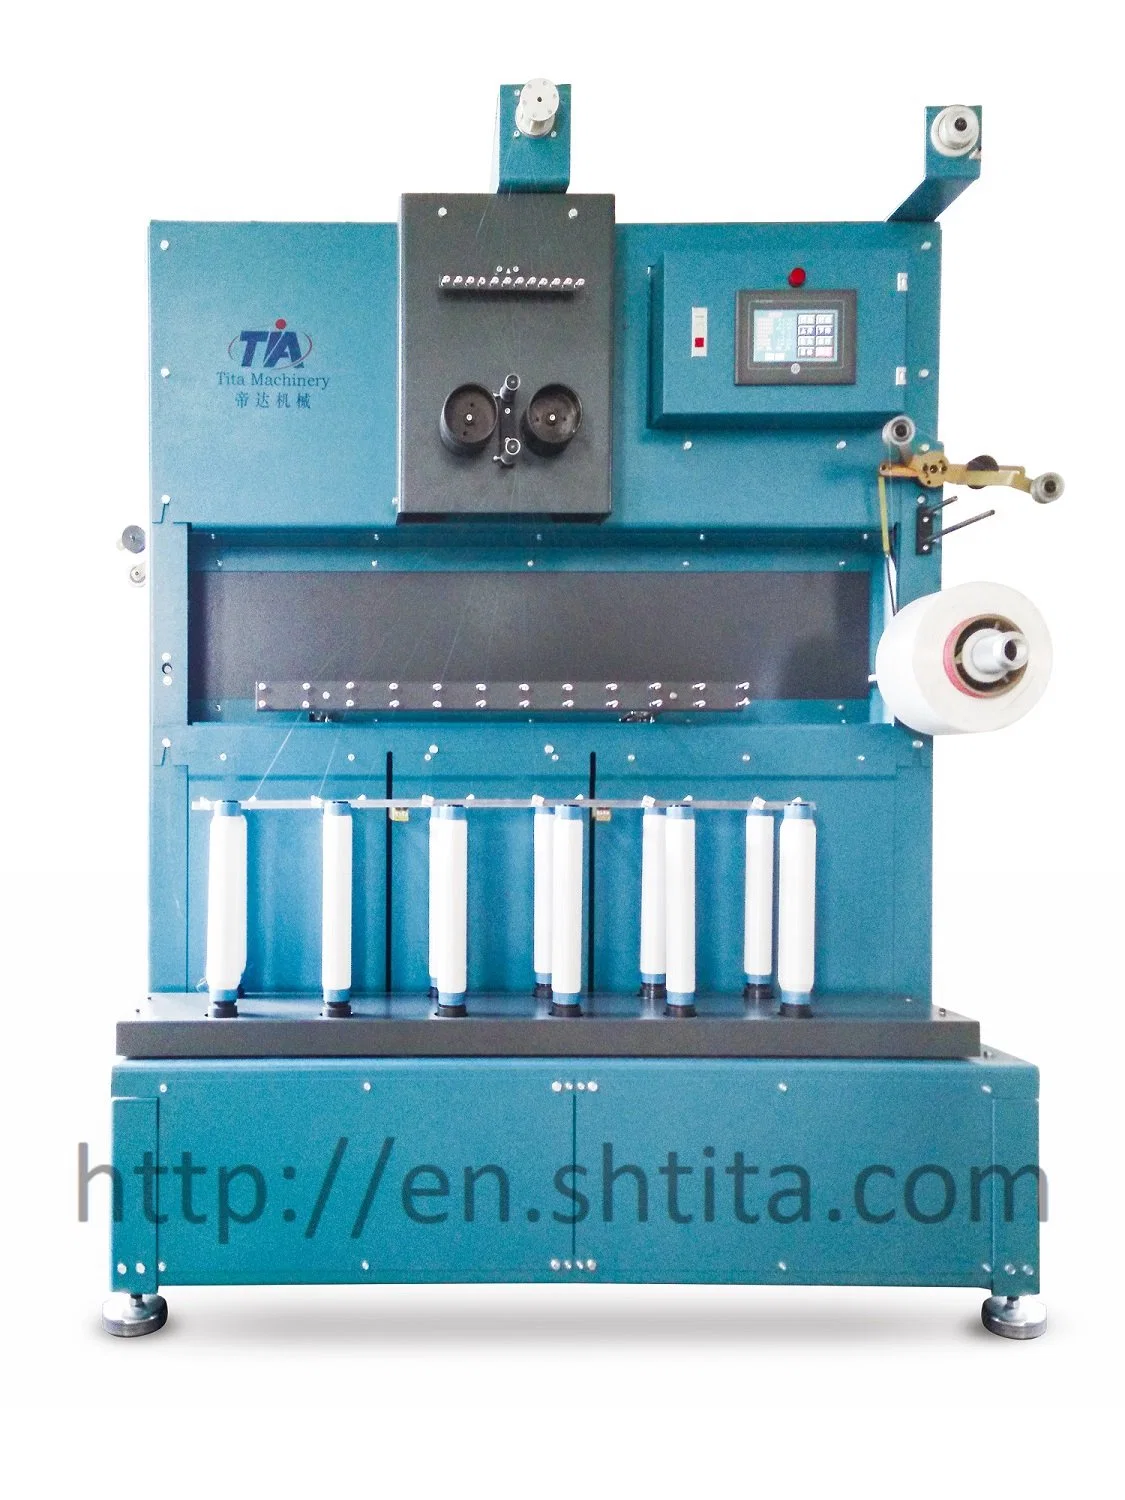 Spinning Production Line - Mother Yarn Splitting Machine for POY FDY Yarn